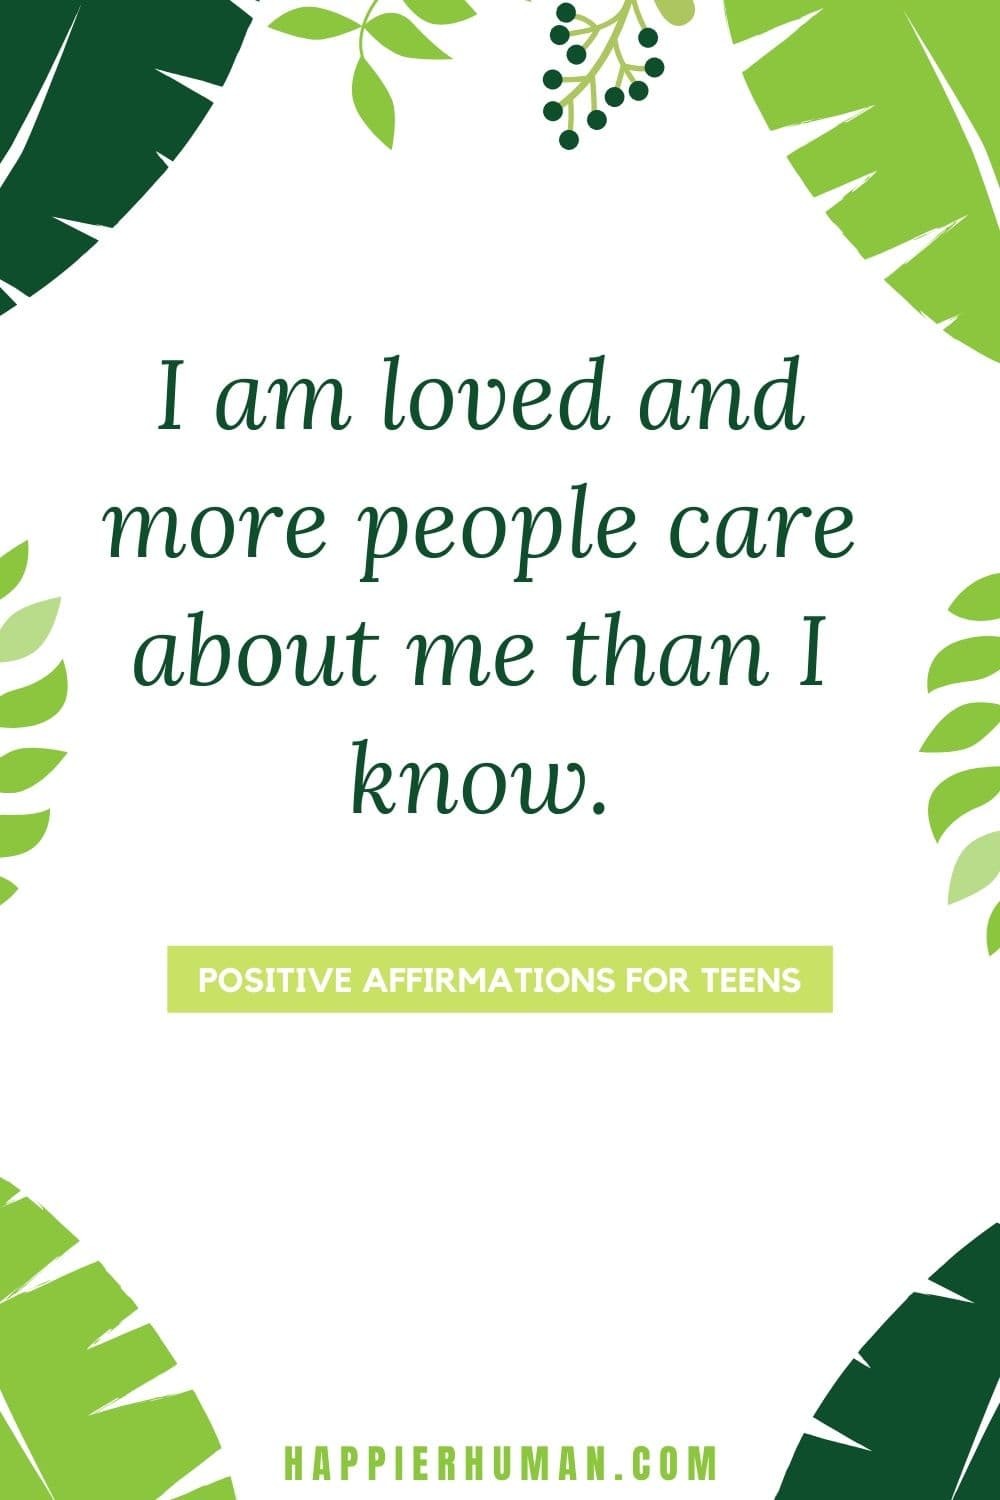 15+ Positive Affirmations Activities for Kids and Teens - The